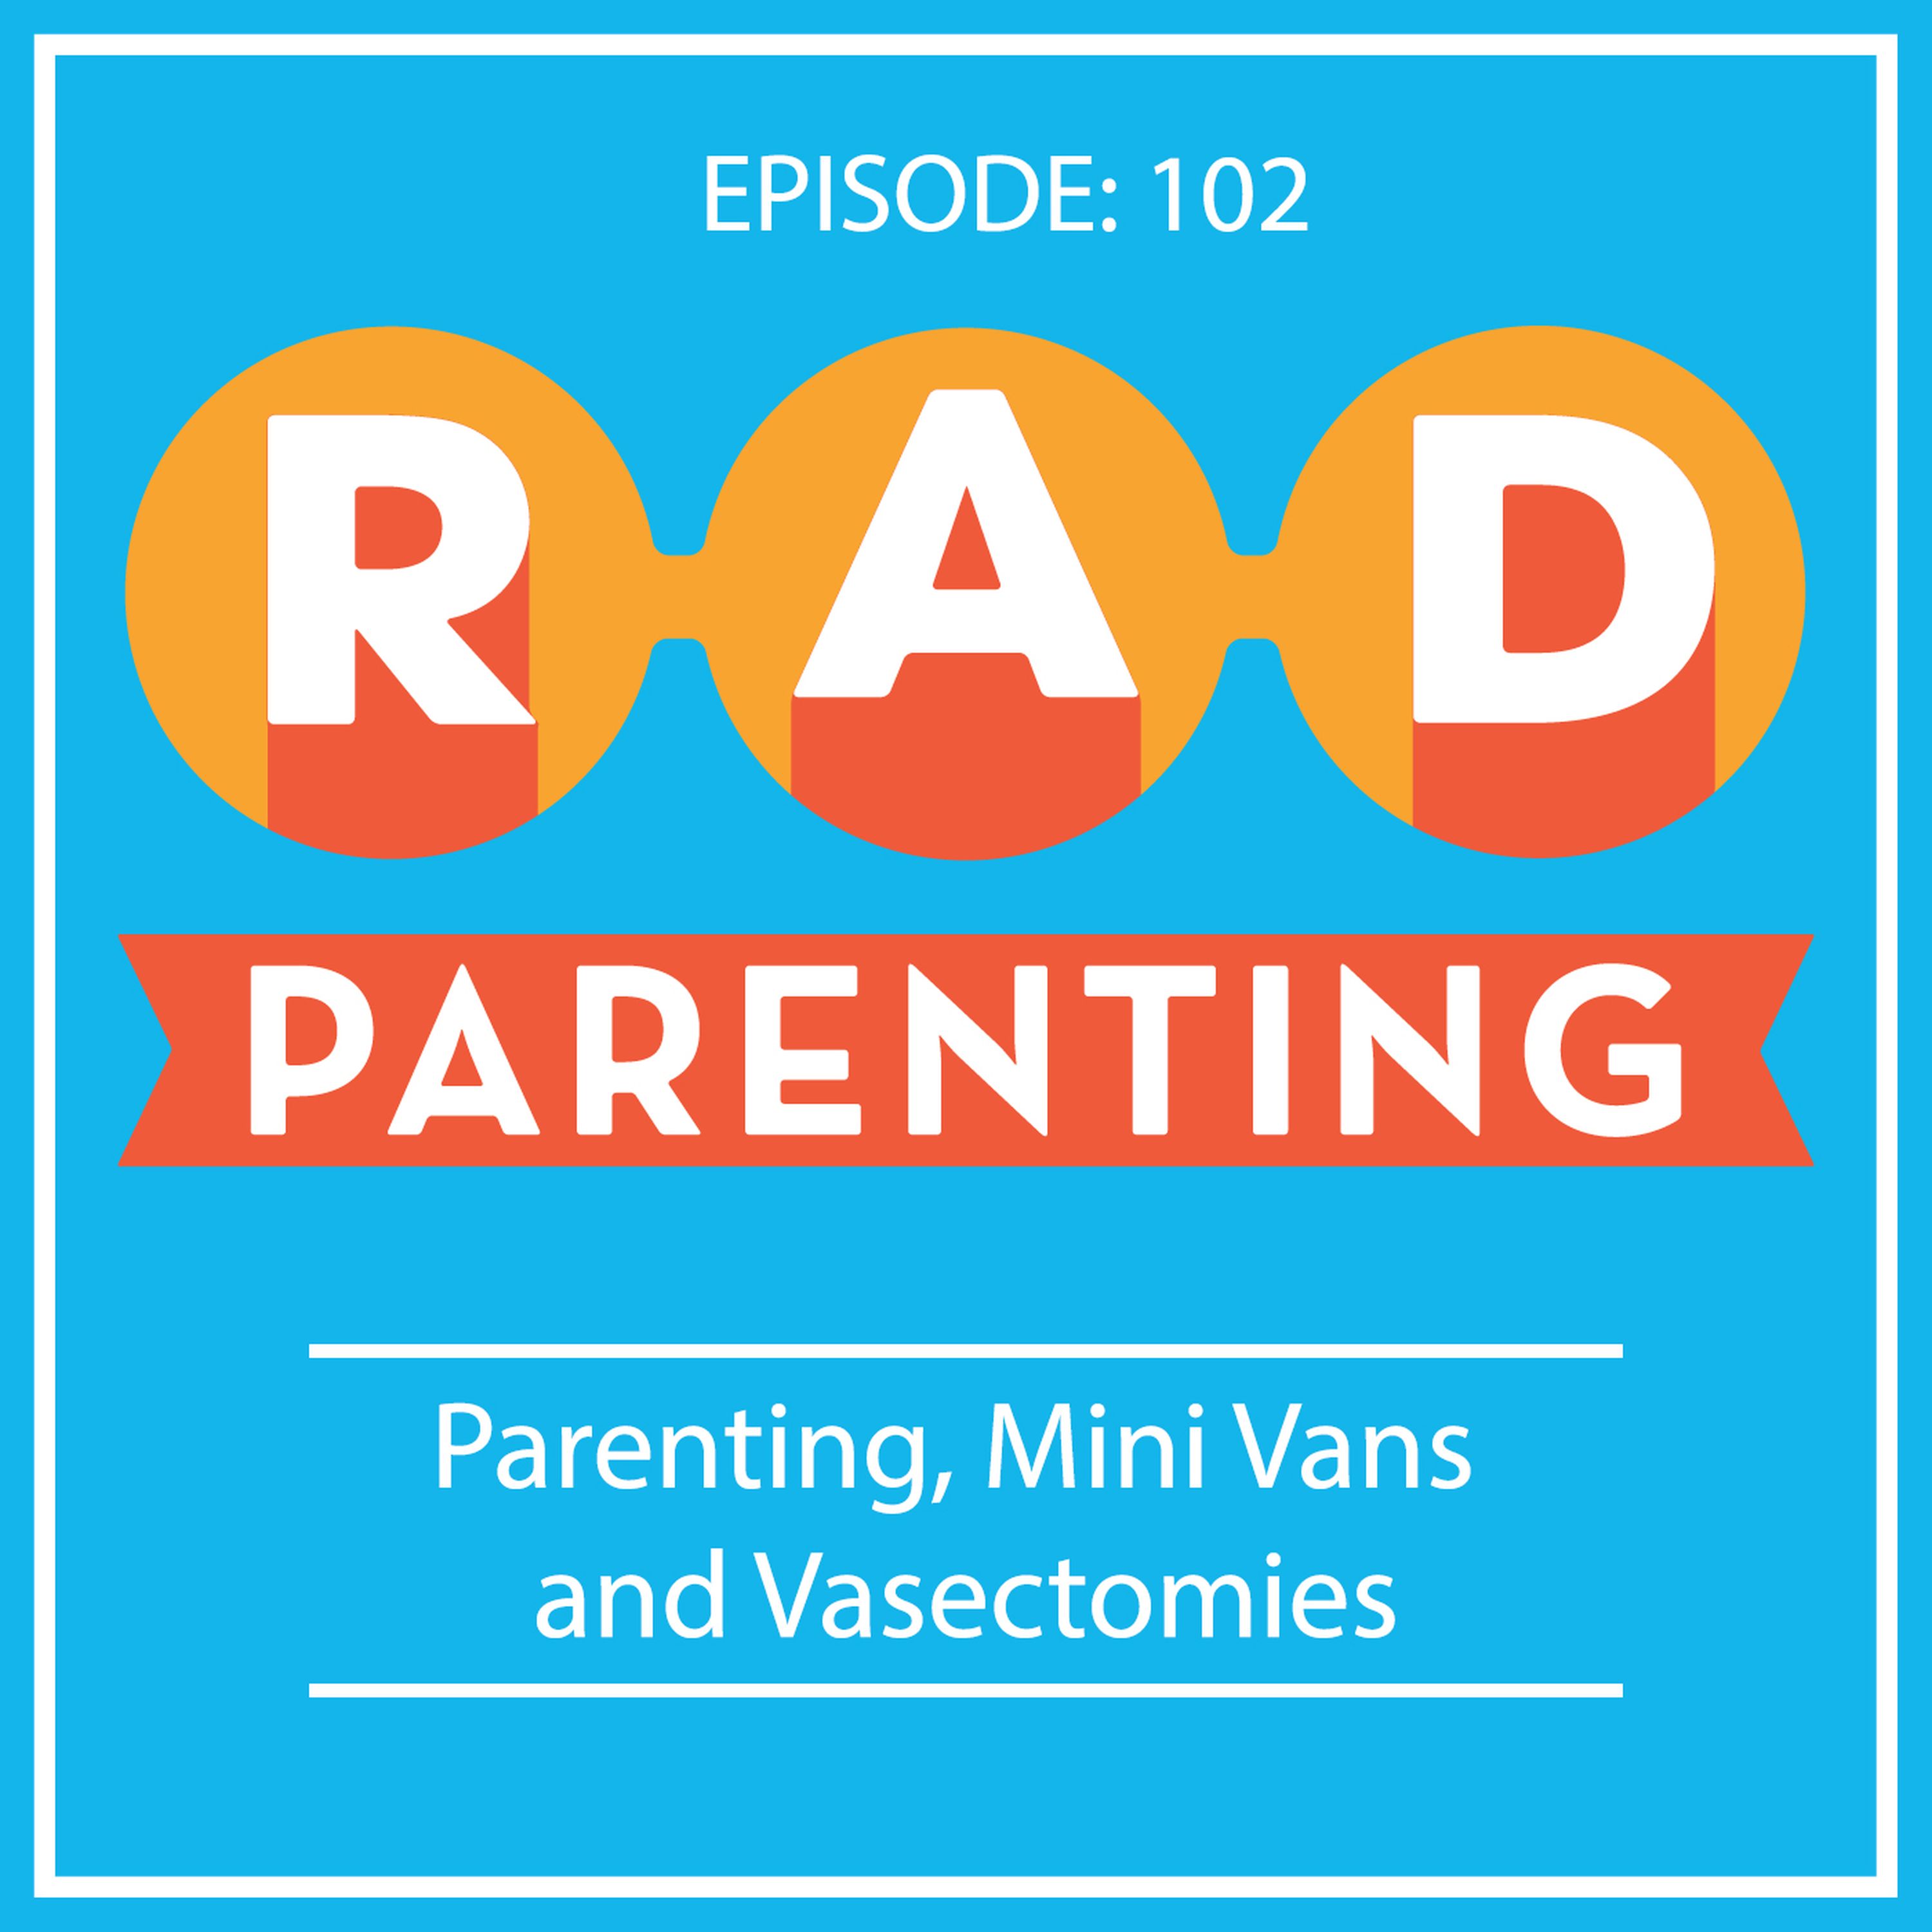 Parenting, Mini Vans and Vasectomies